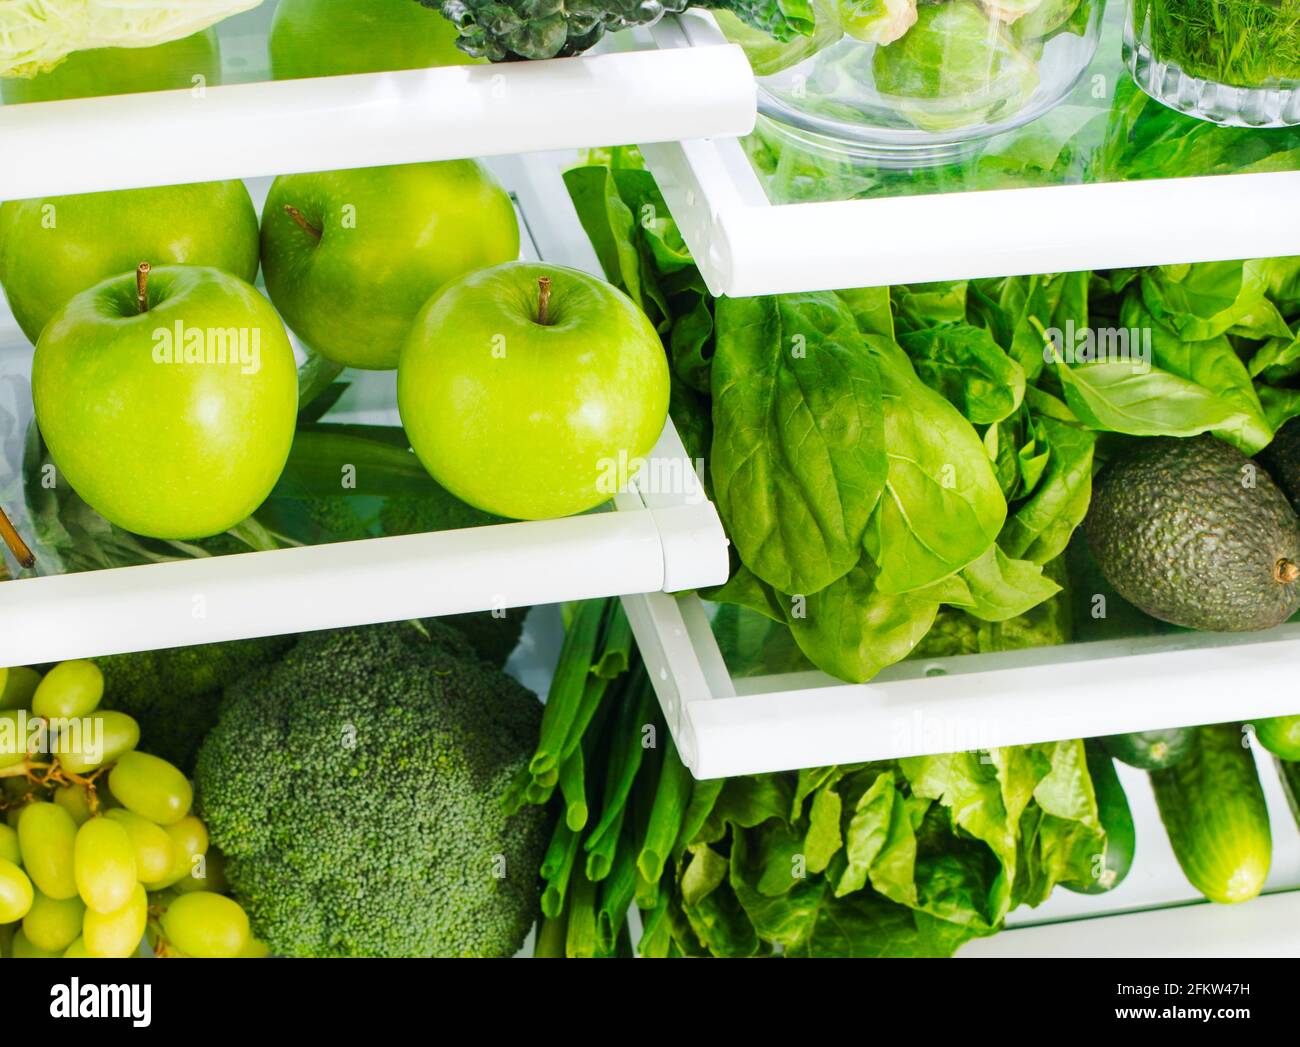 Fresh green vegetables and fruits in fridge. Stock Photo